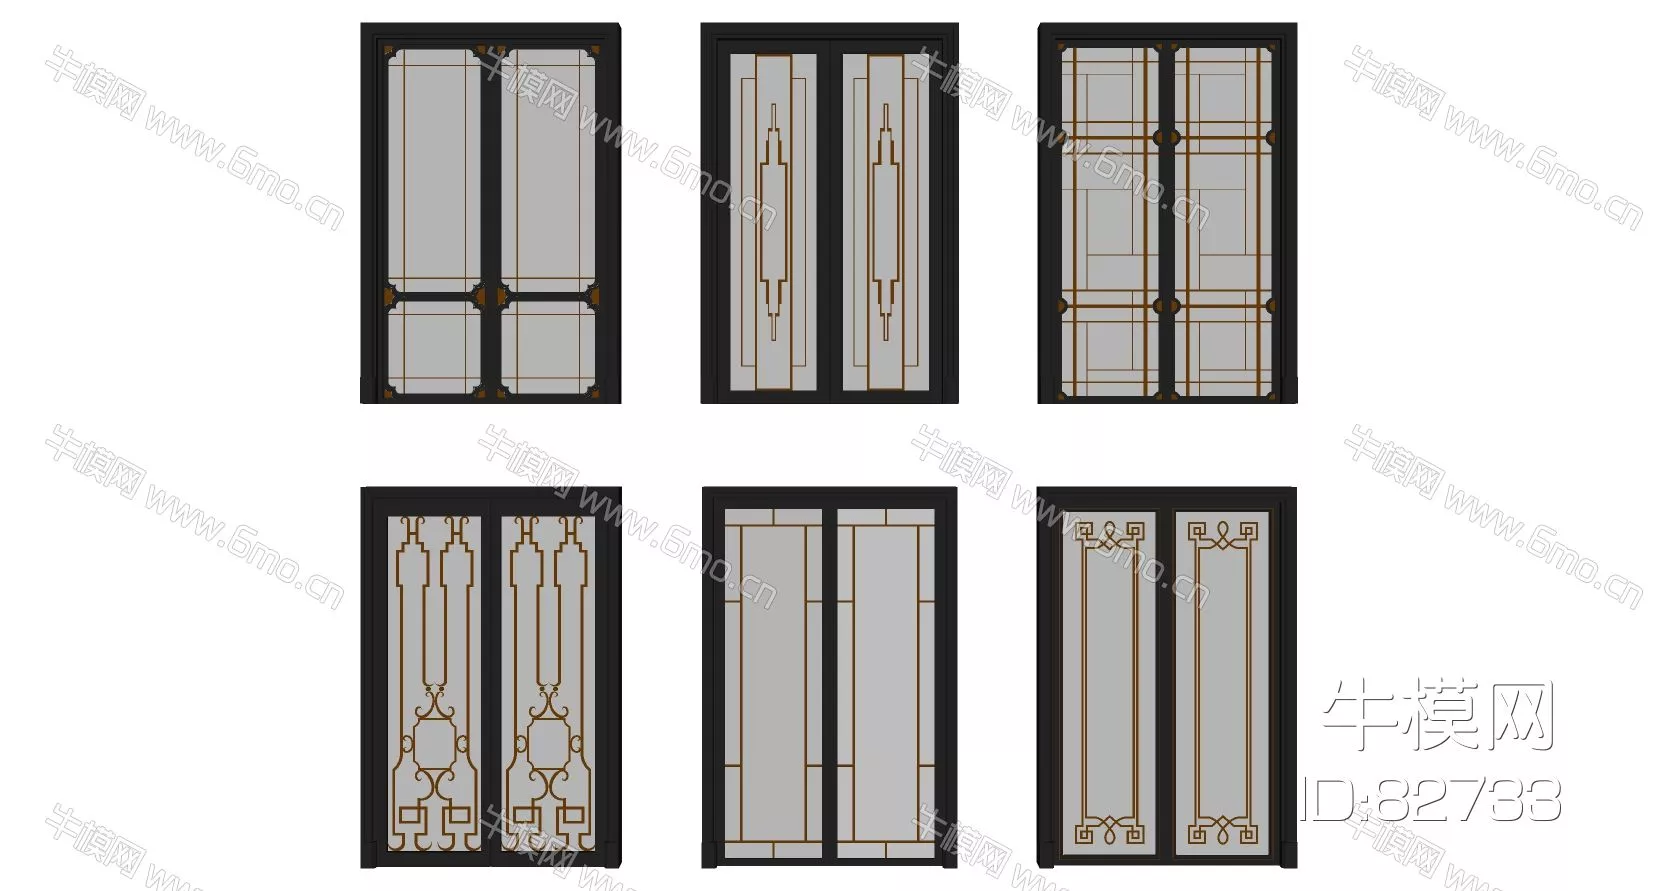 CHINESE DOOR AND WINDOWS - SKETCHUP 3D MODEL - ENSCAPE - 82733